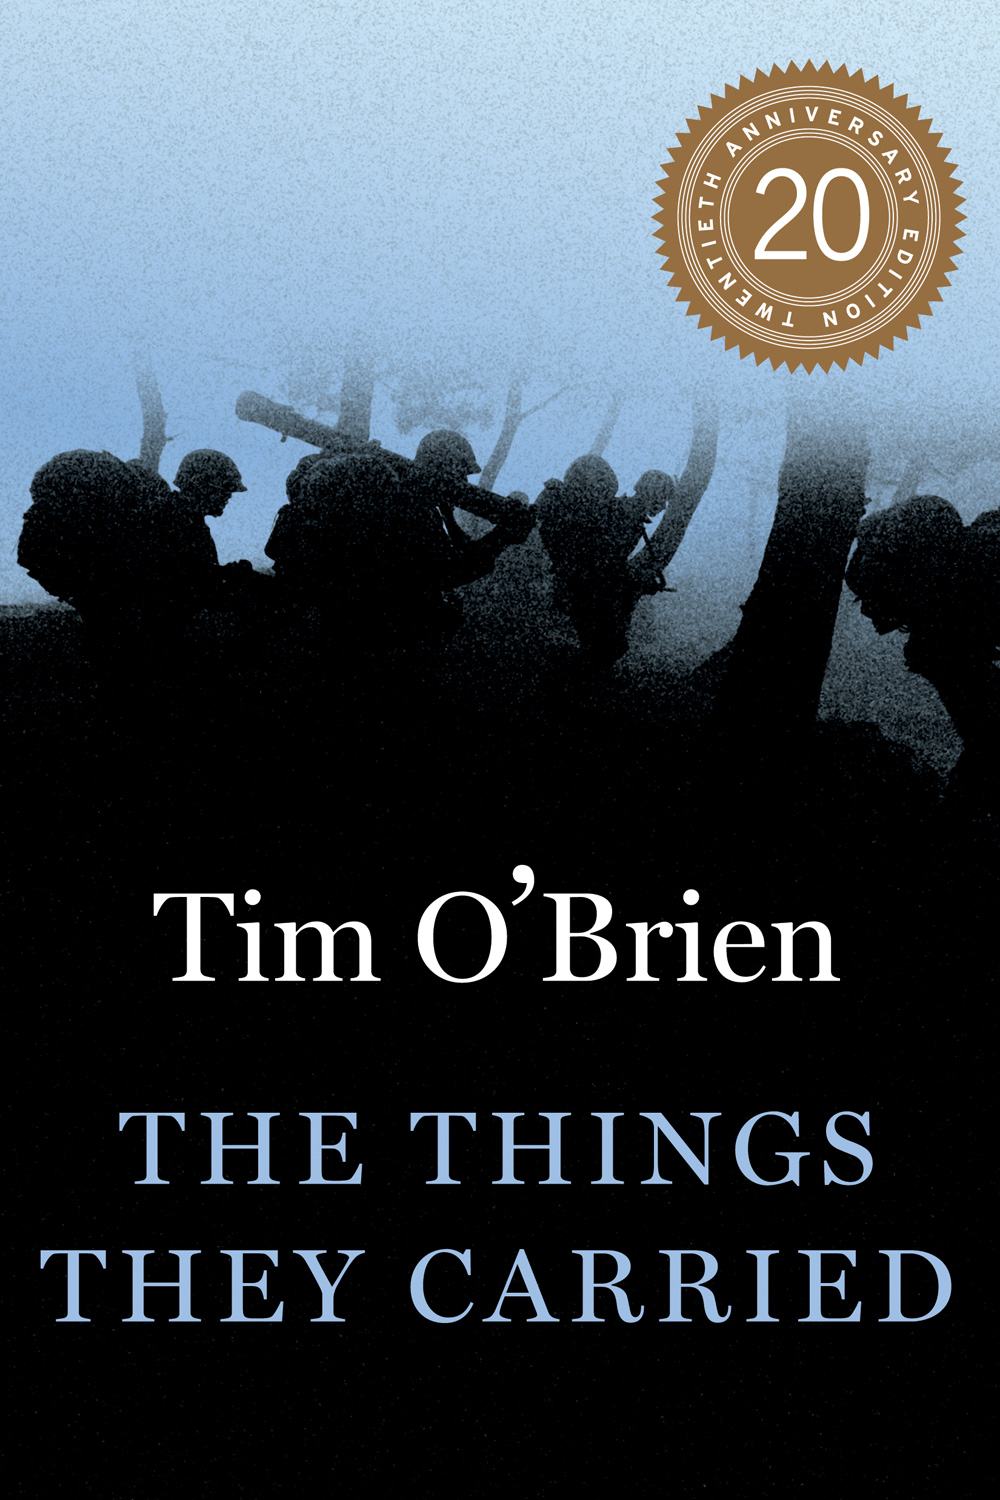 The Things They Carried book cover with author name and book title  with a blurred image of soldiers carrying their weapons through a forest